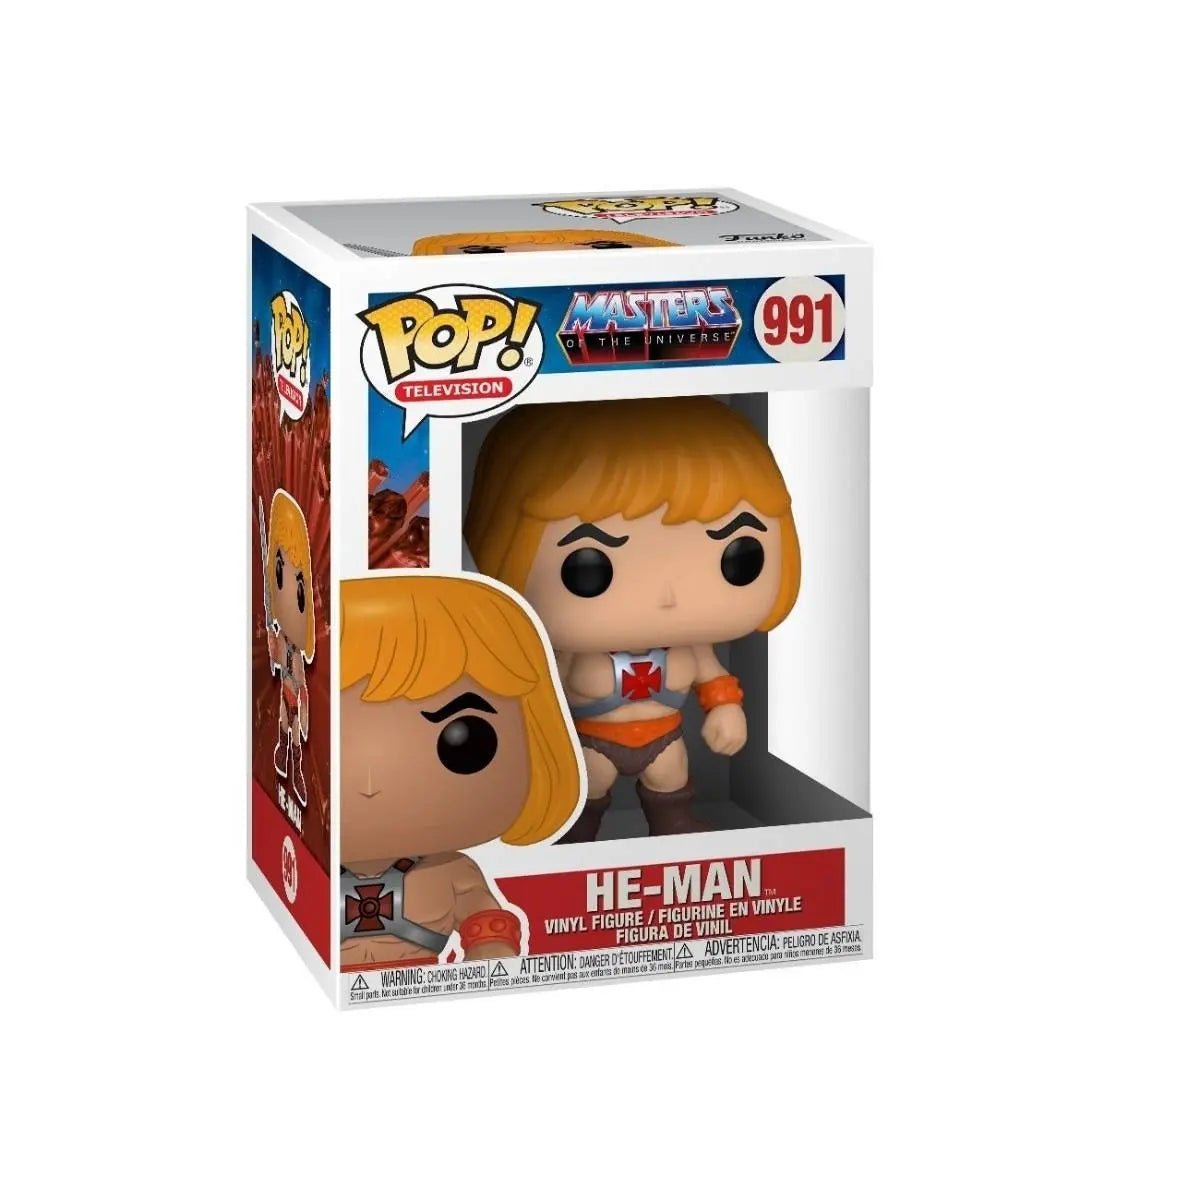 Pop! Vinyl - Masters Of The Universe - He-Man - Simon's Collectibles